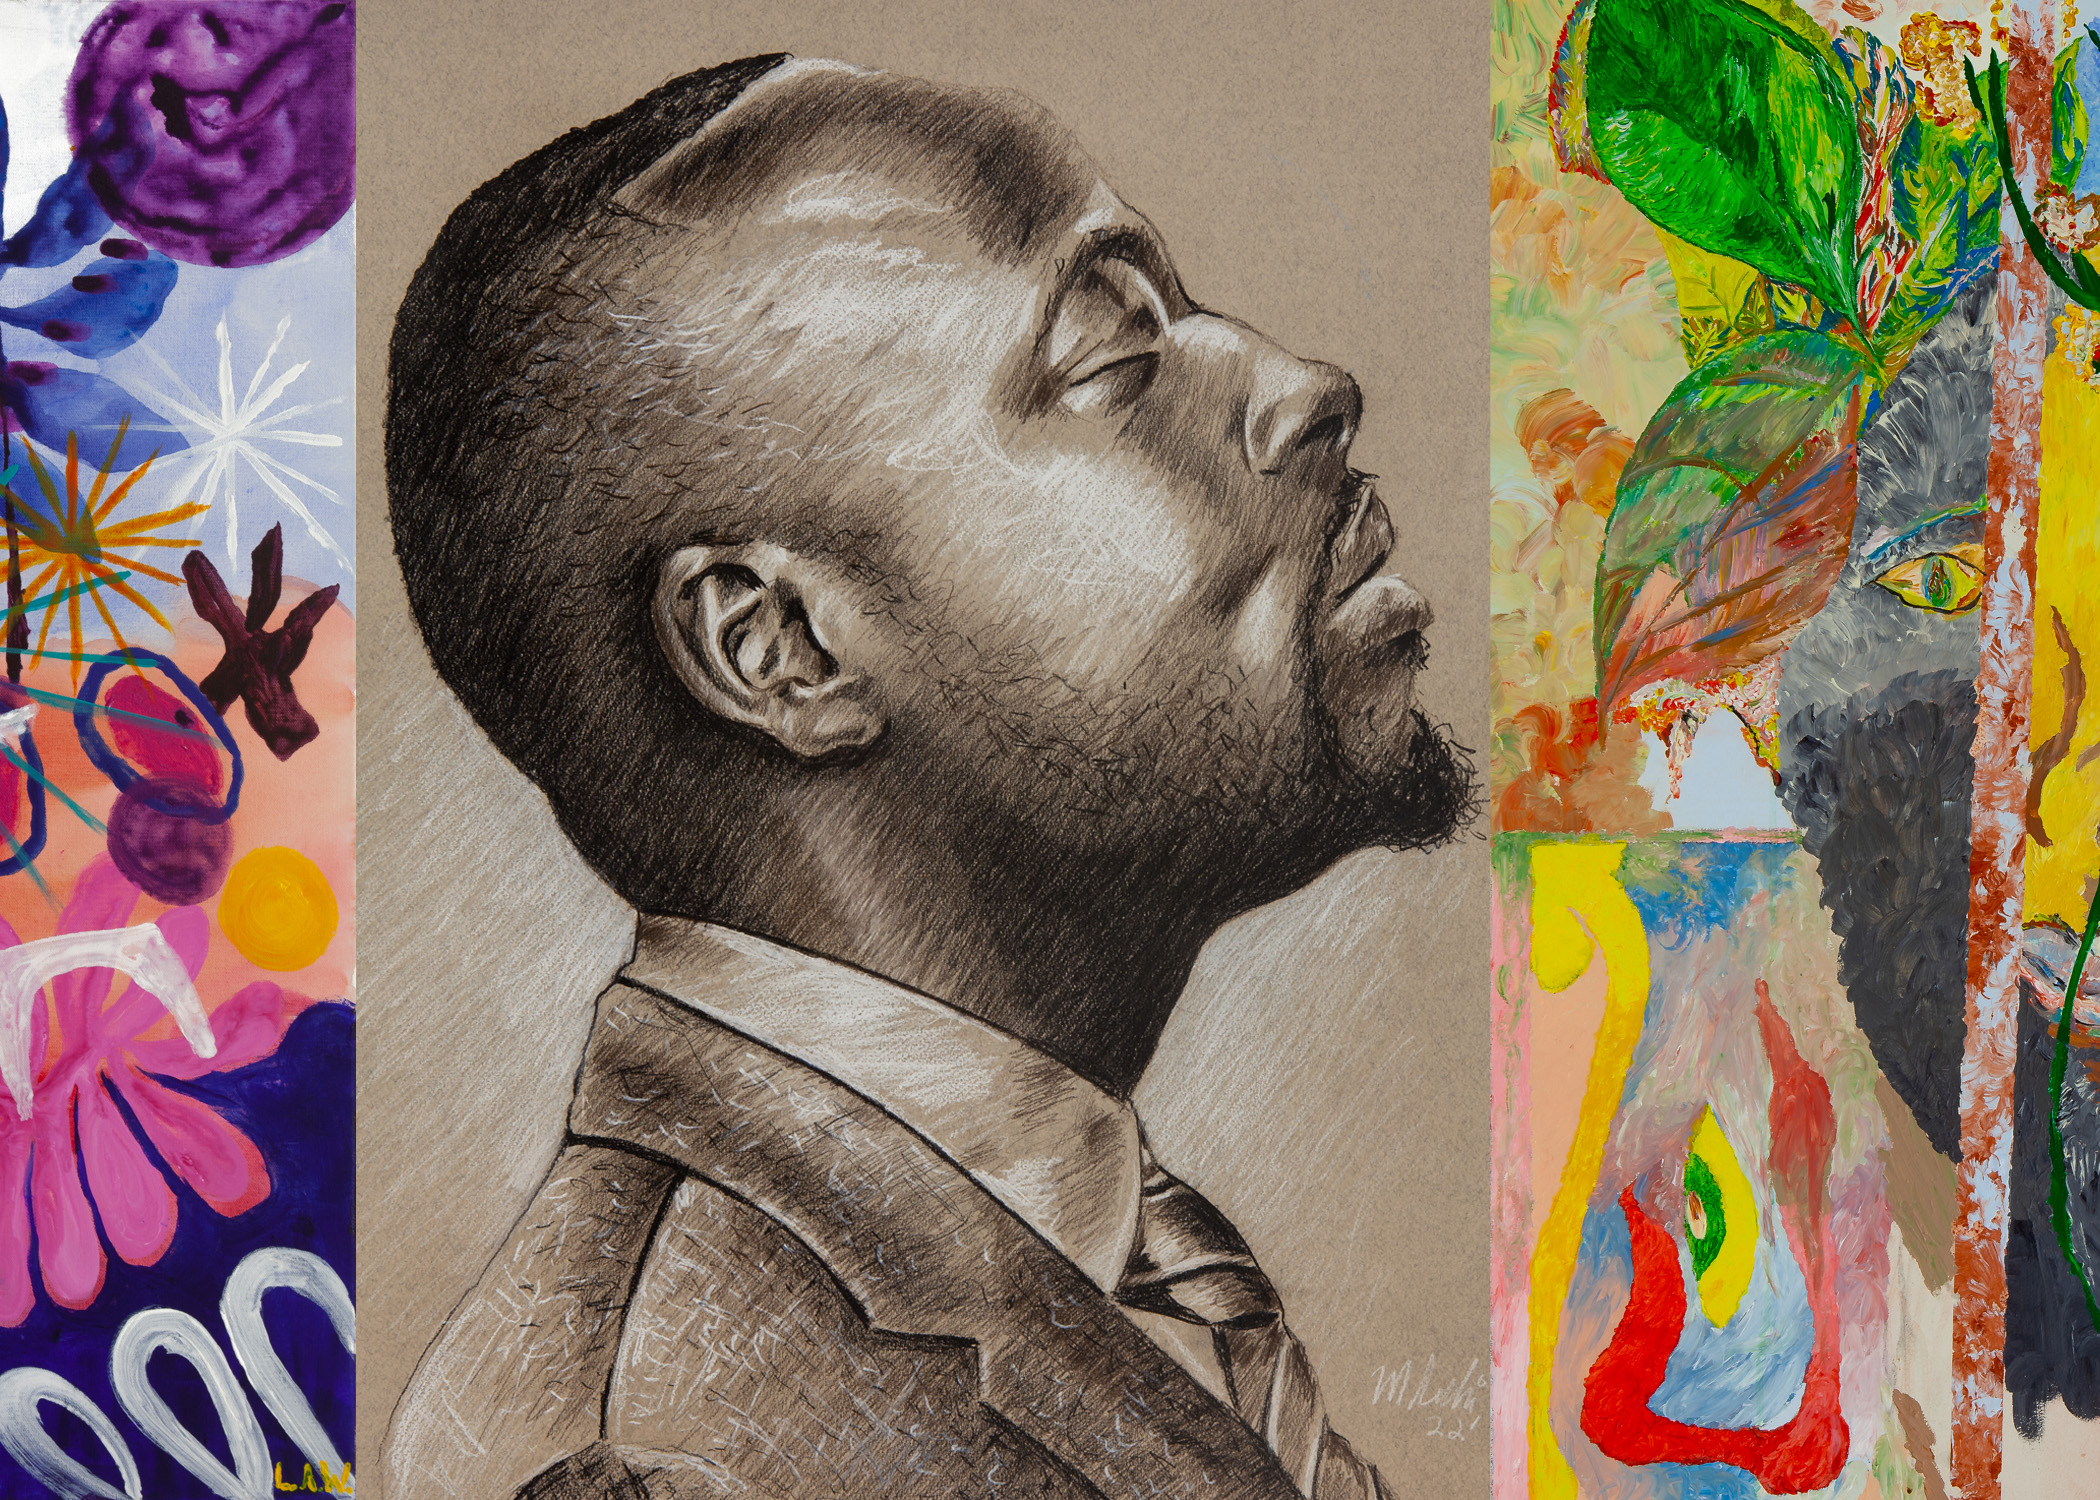 Brightly colored abstract paintings and realism charcoal portrait